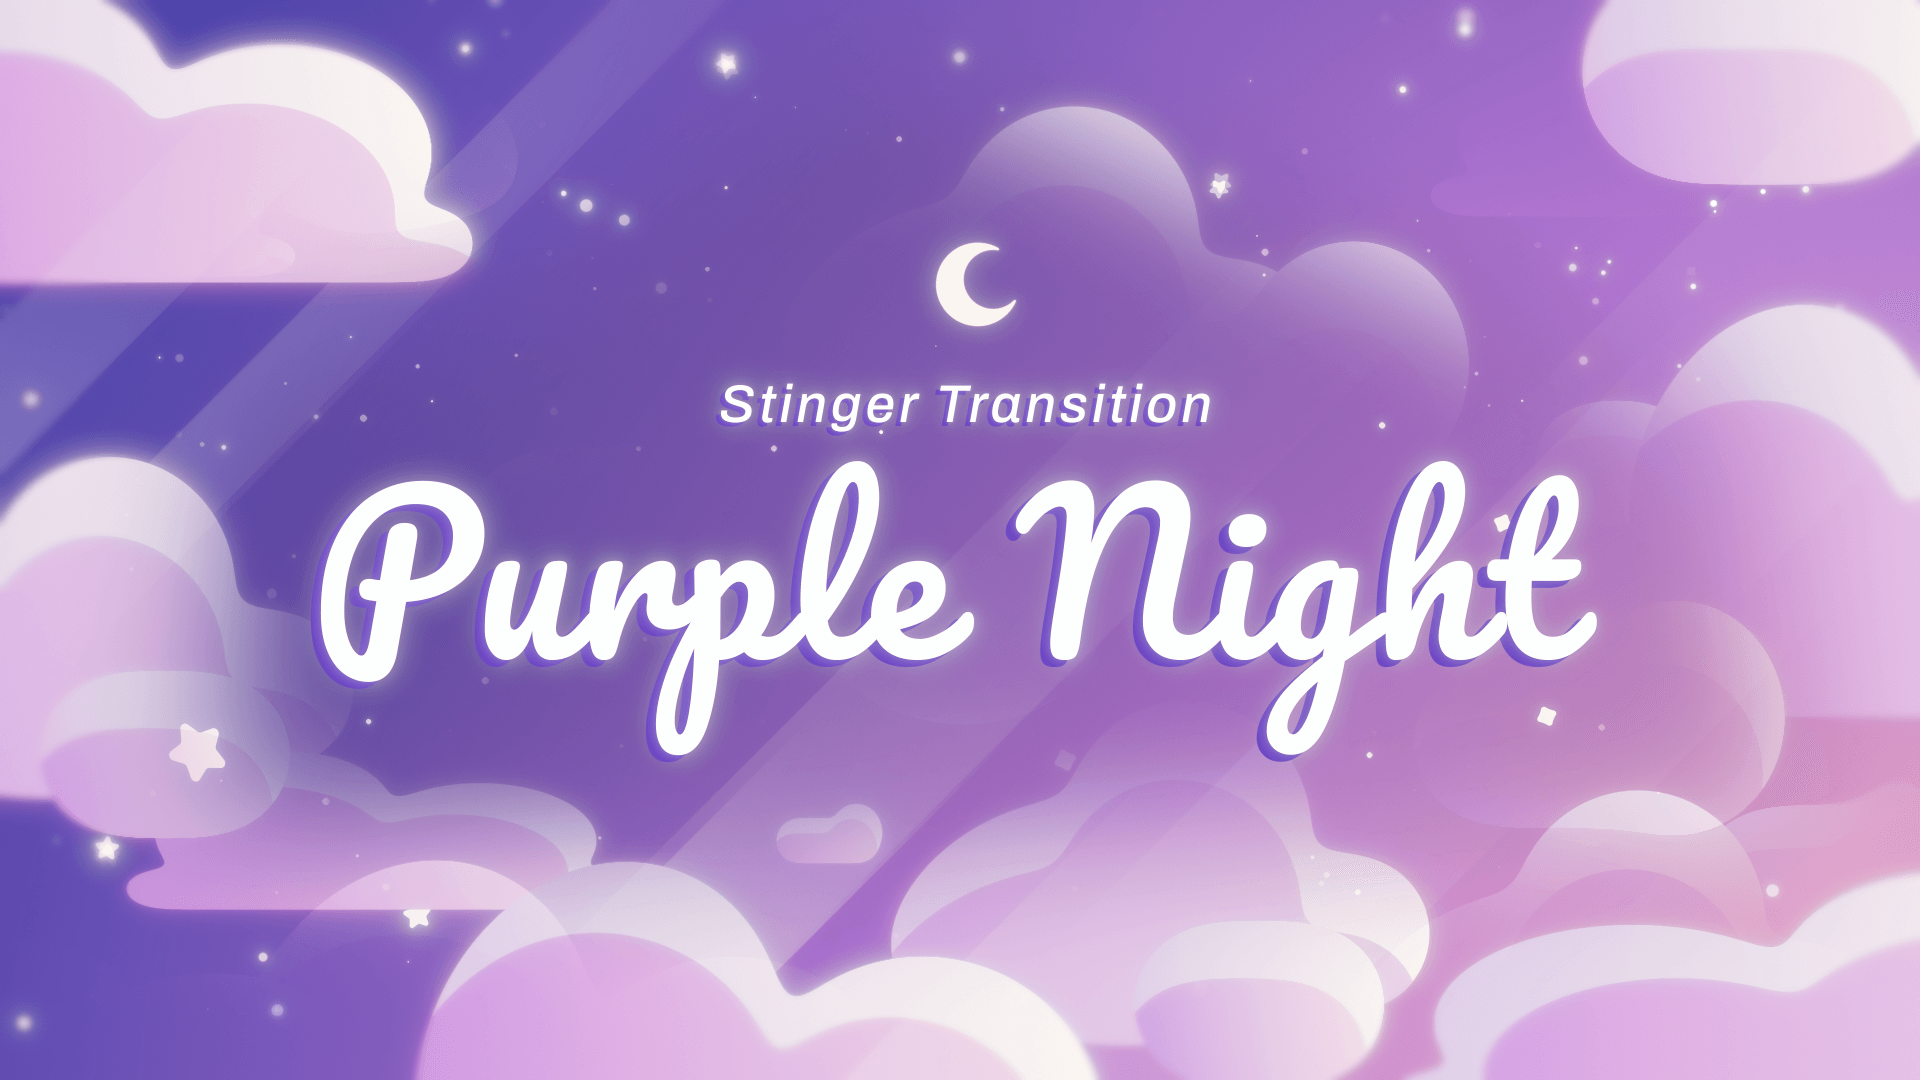 Purple Night - Stinger Transition for Twitch, Youtube and Facebook